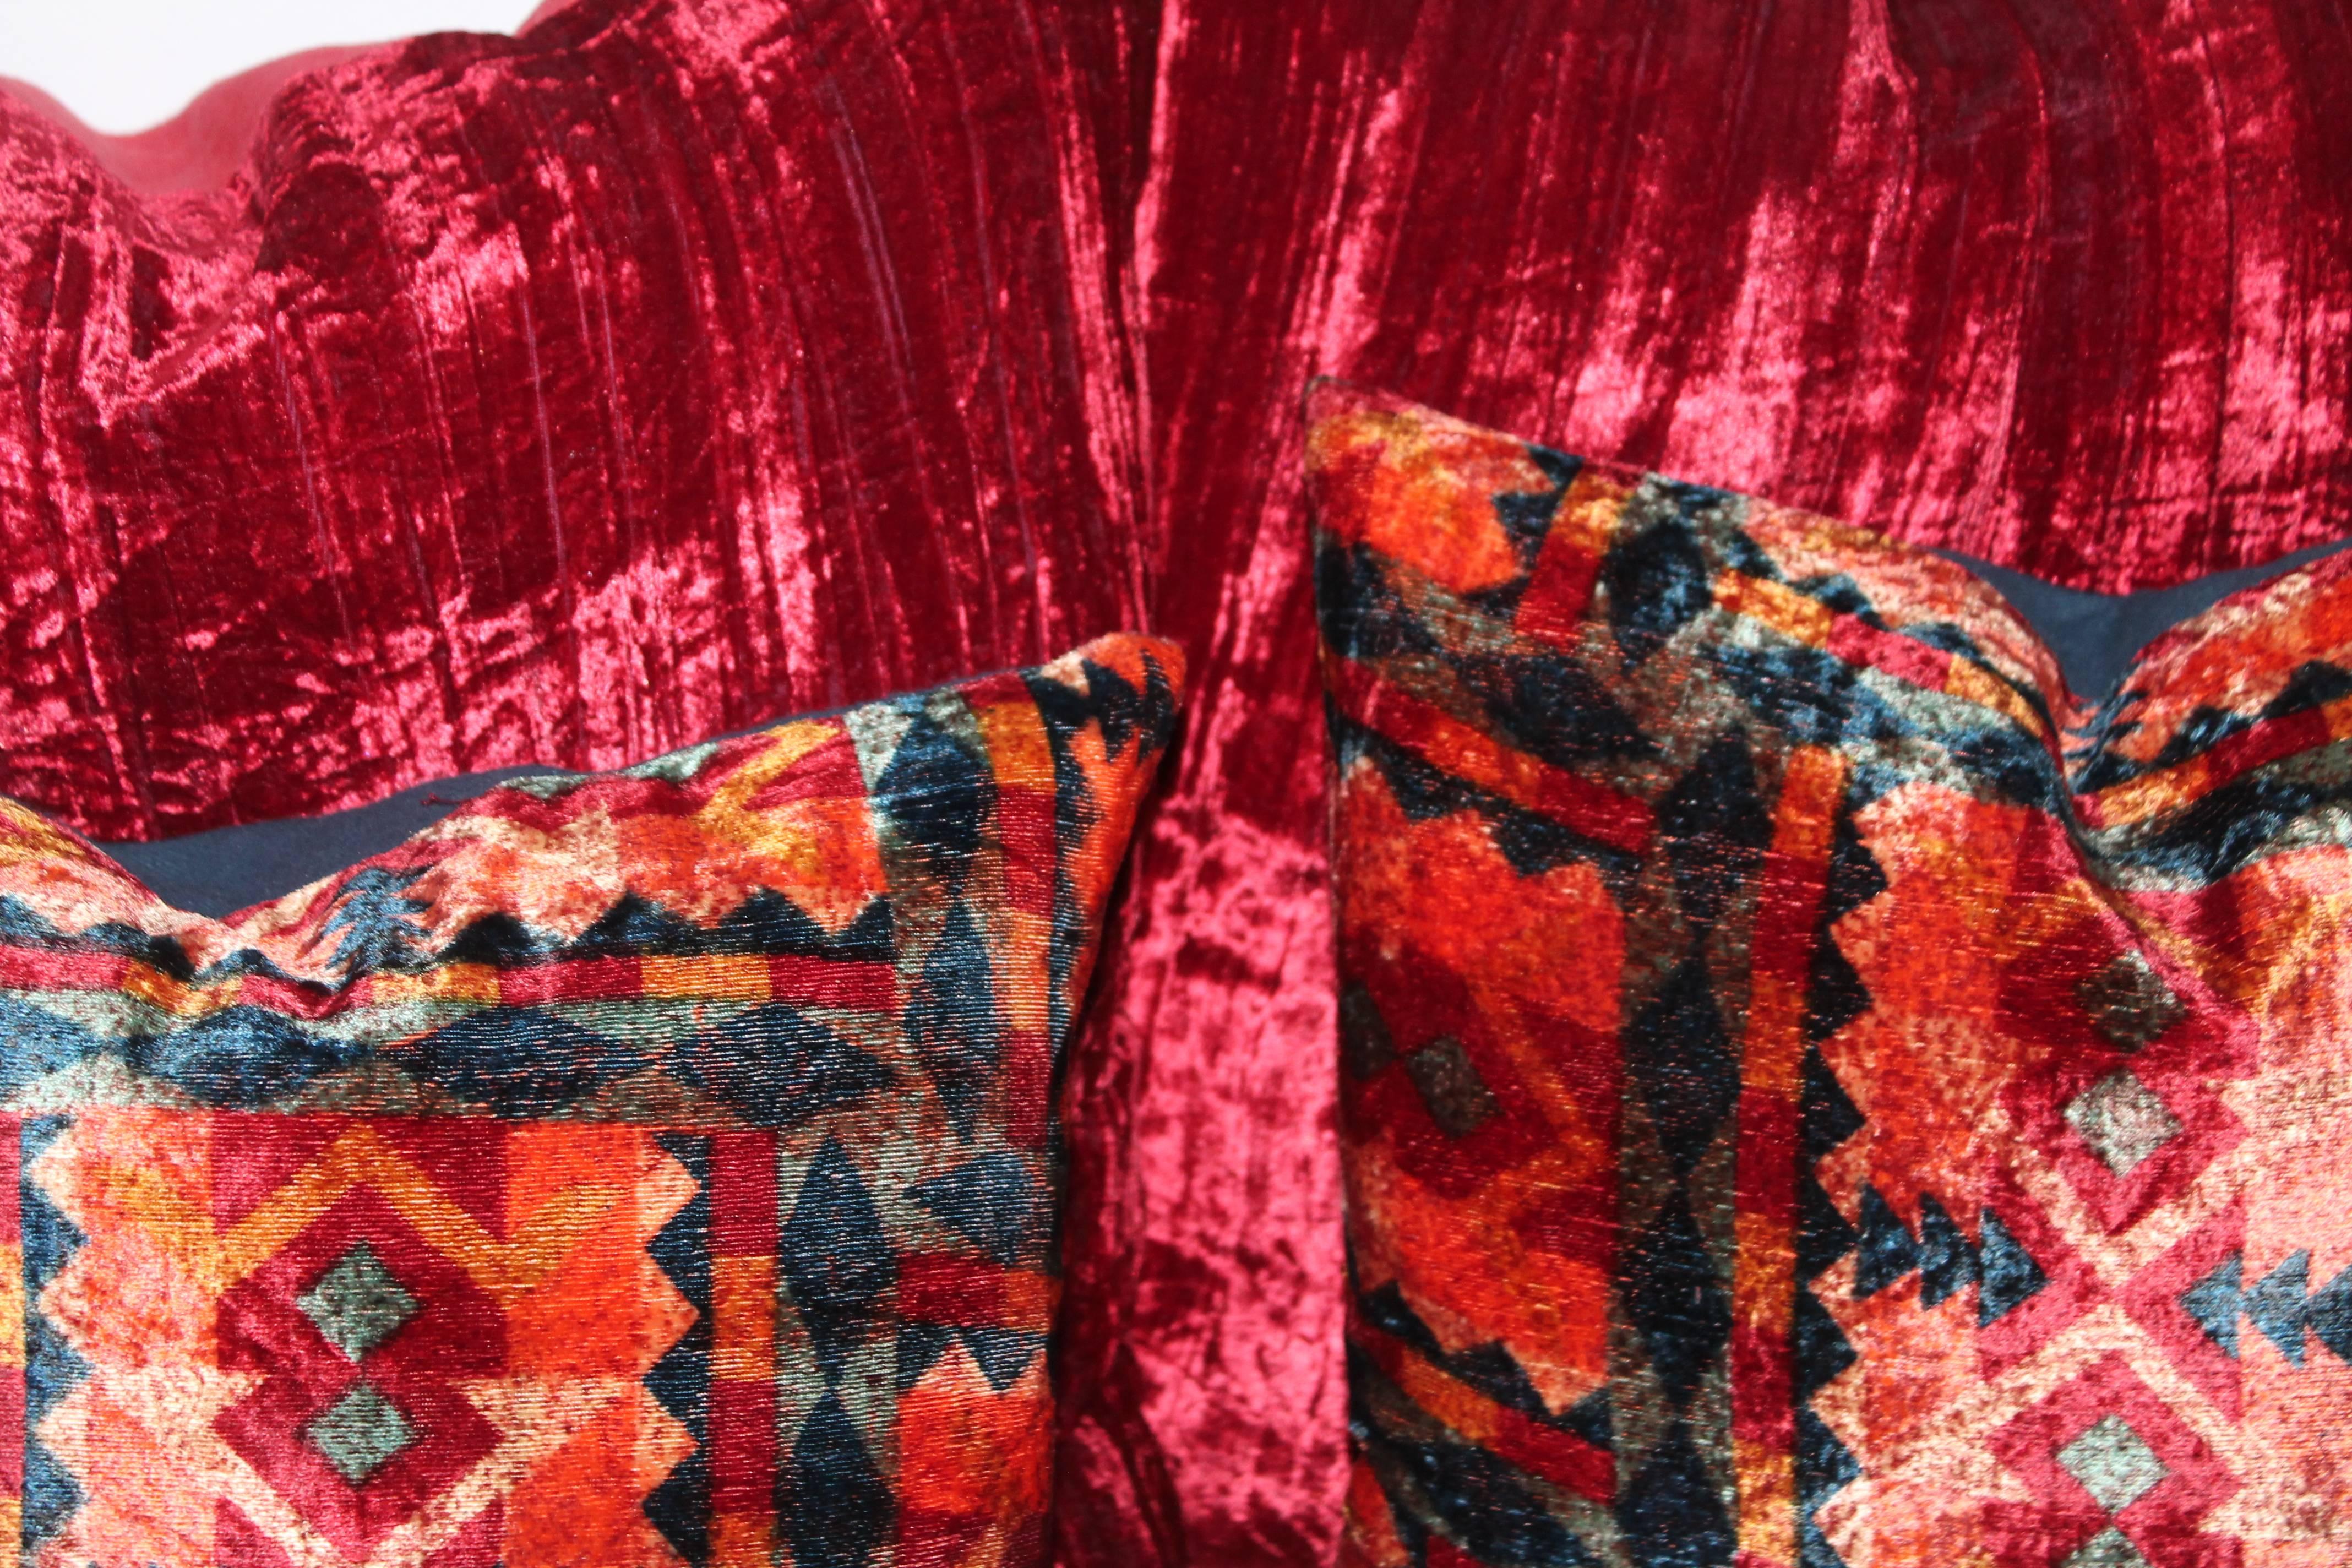 These vintage red silk velvet pillows have red cotton linen backings. There are two pairs in stock. The smaller patterned silk velvet pillows have blue cotton linen backings. The red velvet are 21 x 21 and the multi patterned velvet are 18 x 18 in